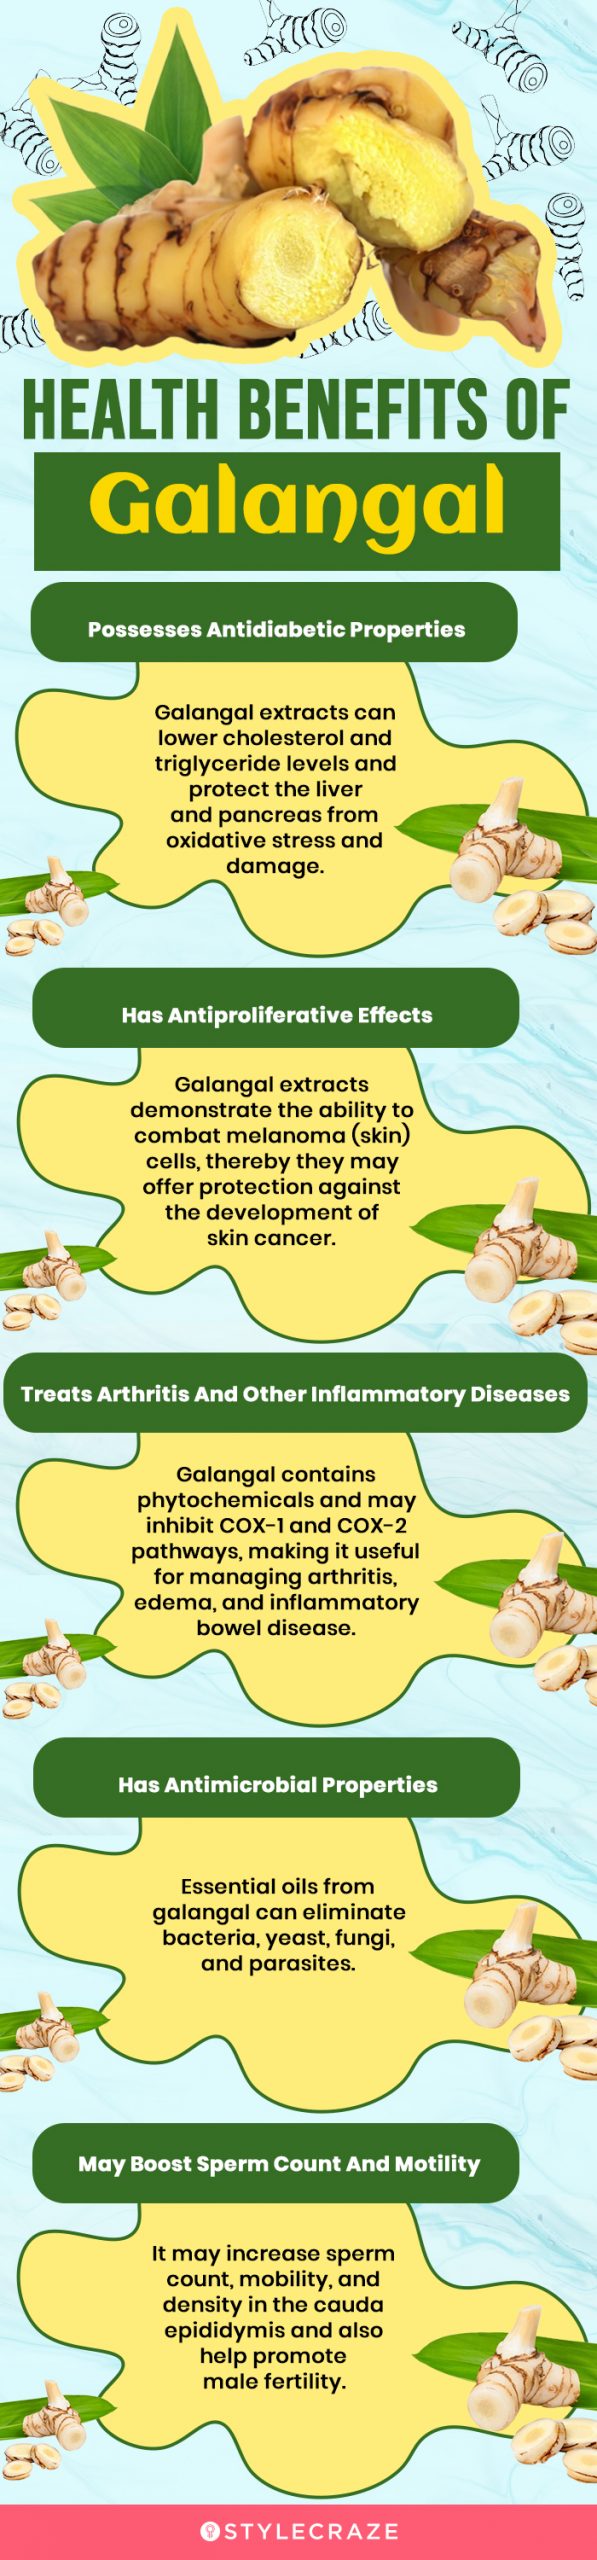 health benefits of galangal(infographic)